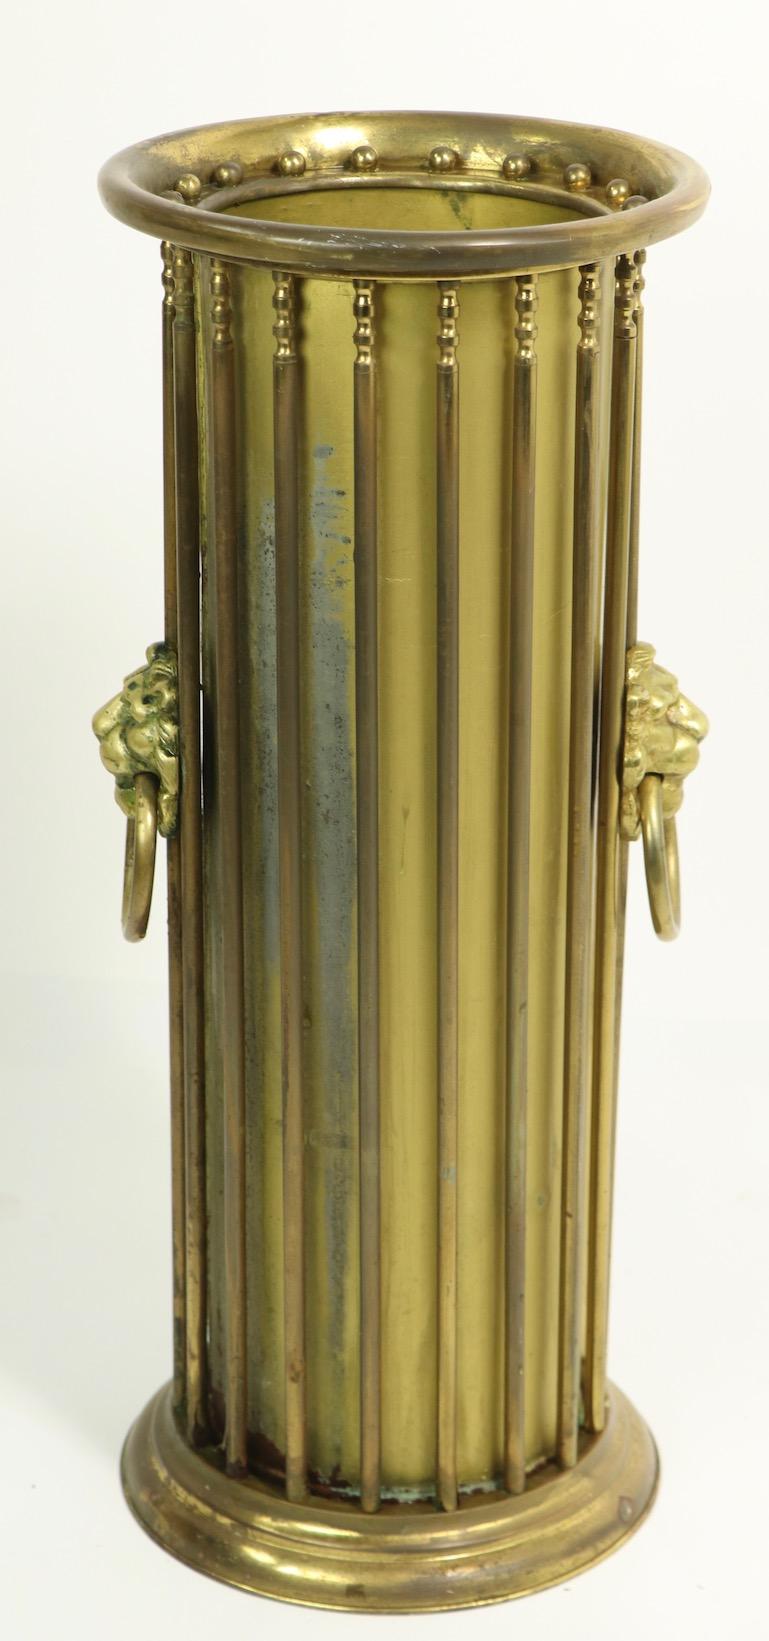 Classical Revival brass umbrella, or cane stand of cylindrical form with repeating brass rods and cast brass lions heads. Probably 1920s American made in the English style, this example does show some wear to finish and loss of brass tubing at the